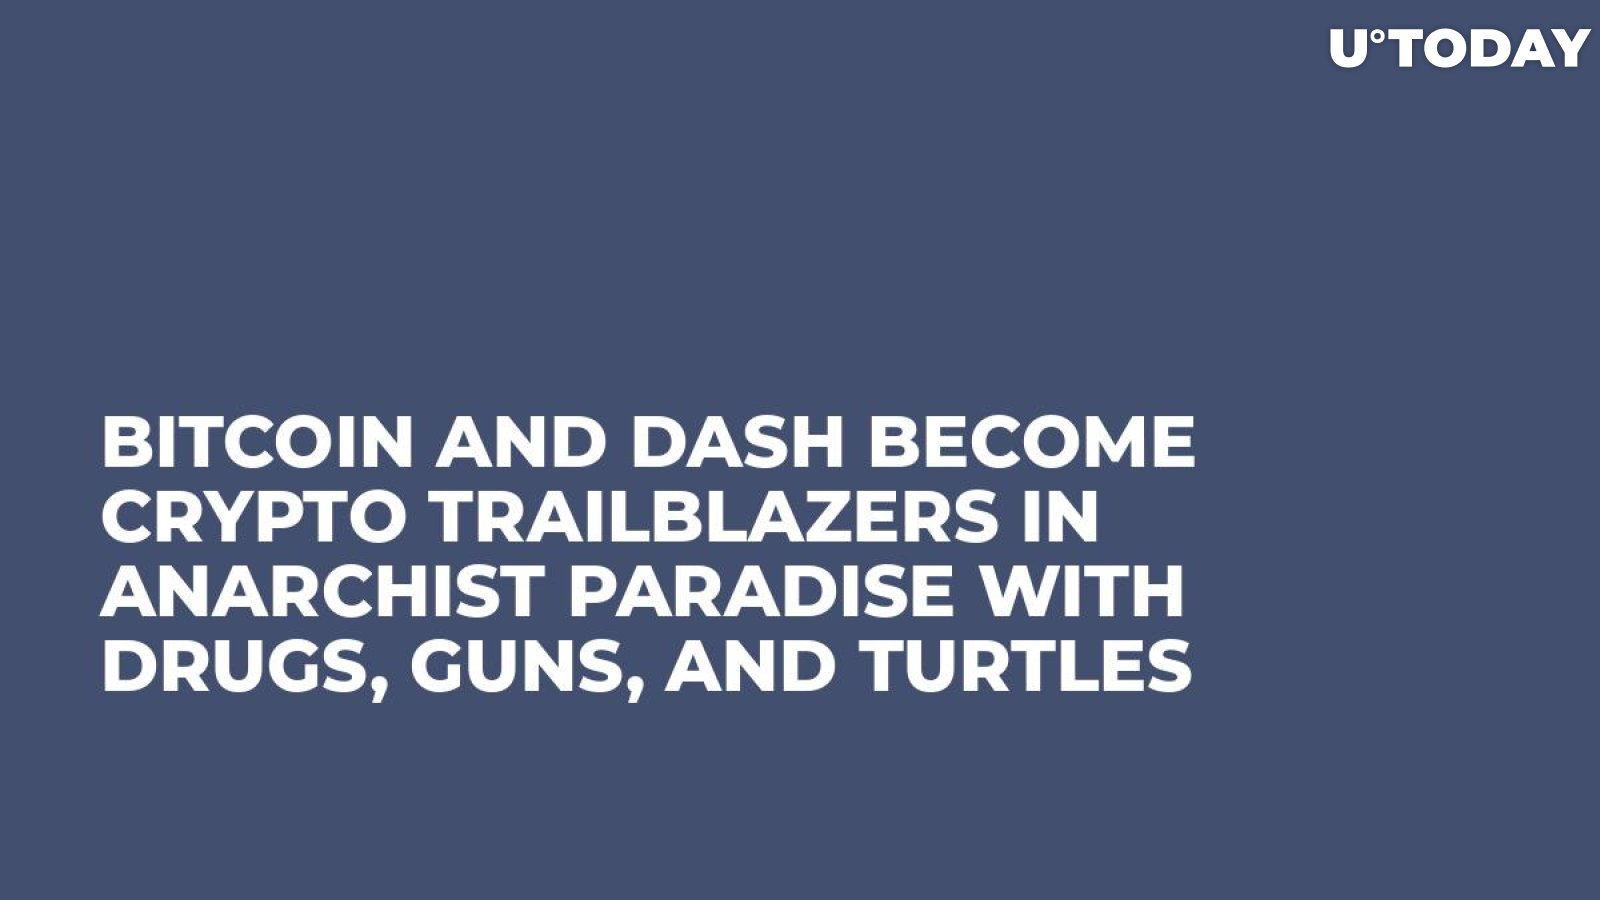 Bitcoin and Dash Become Crypto Trailblazers in Anarchist Paradise with Drugs, Guns, and Turtles  